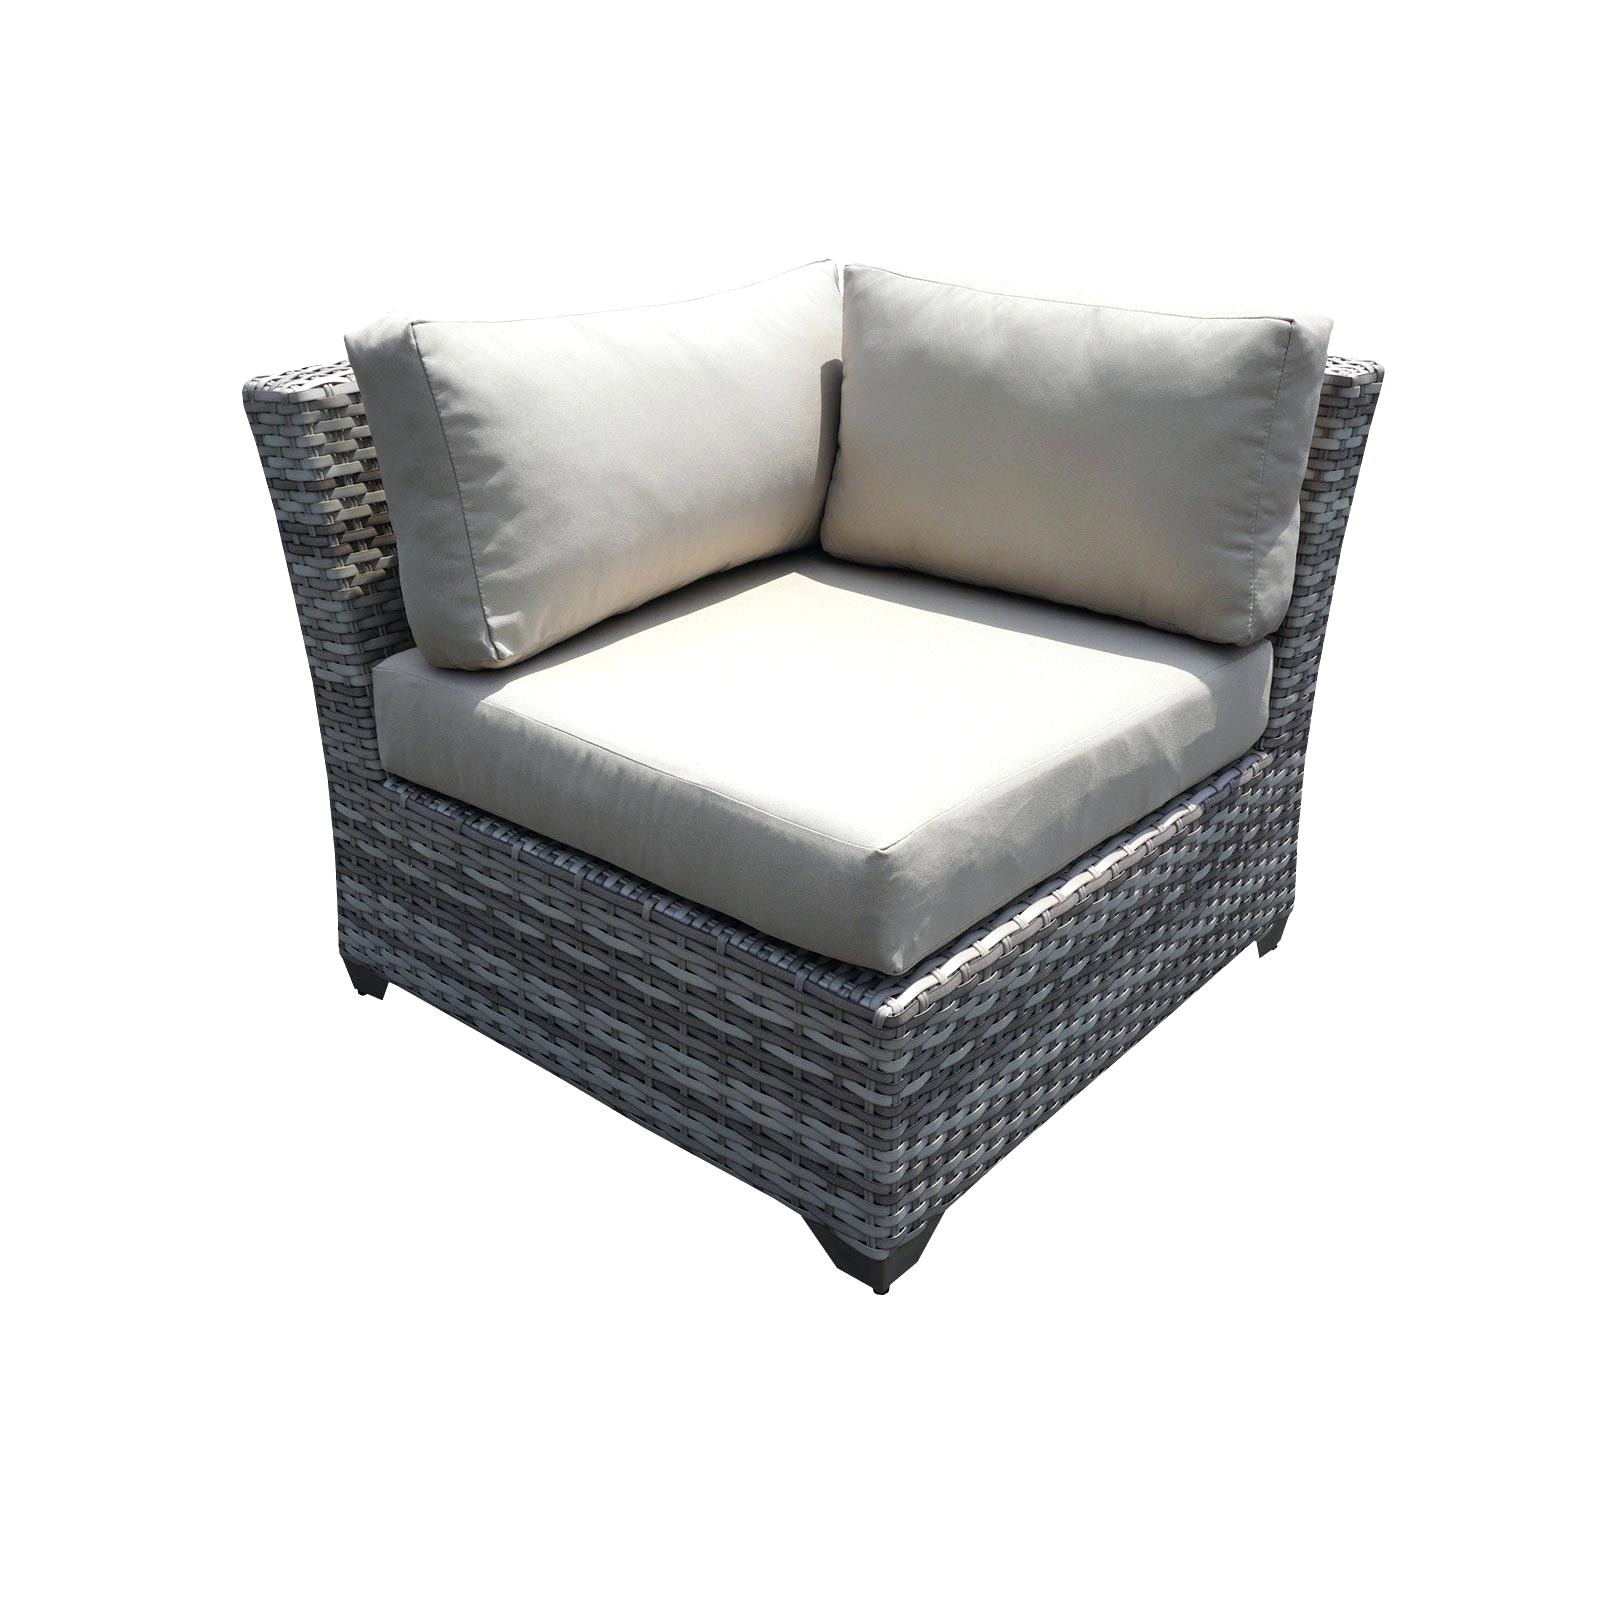 patio chairs at lowes lovely patio recliners unique wicker outdoor sofa 0d patio chairs sale of